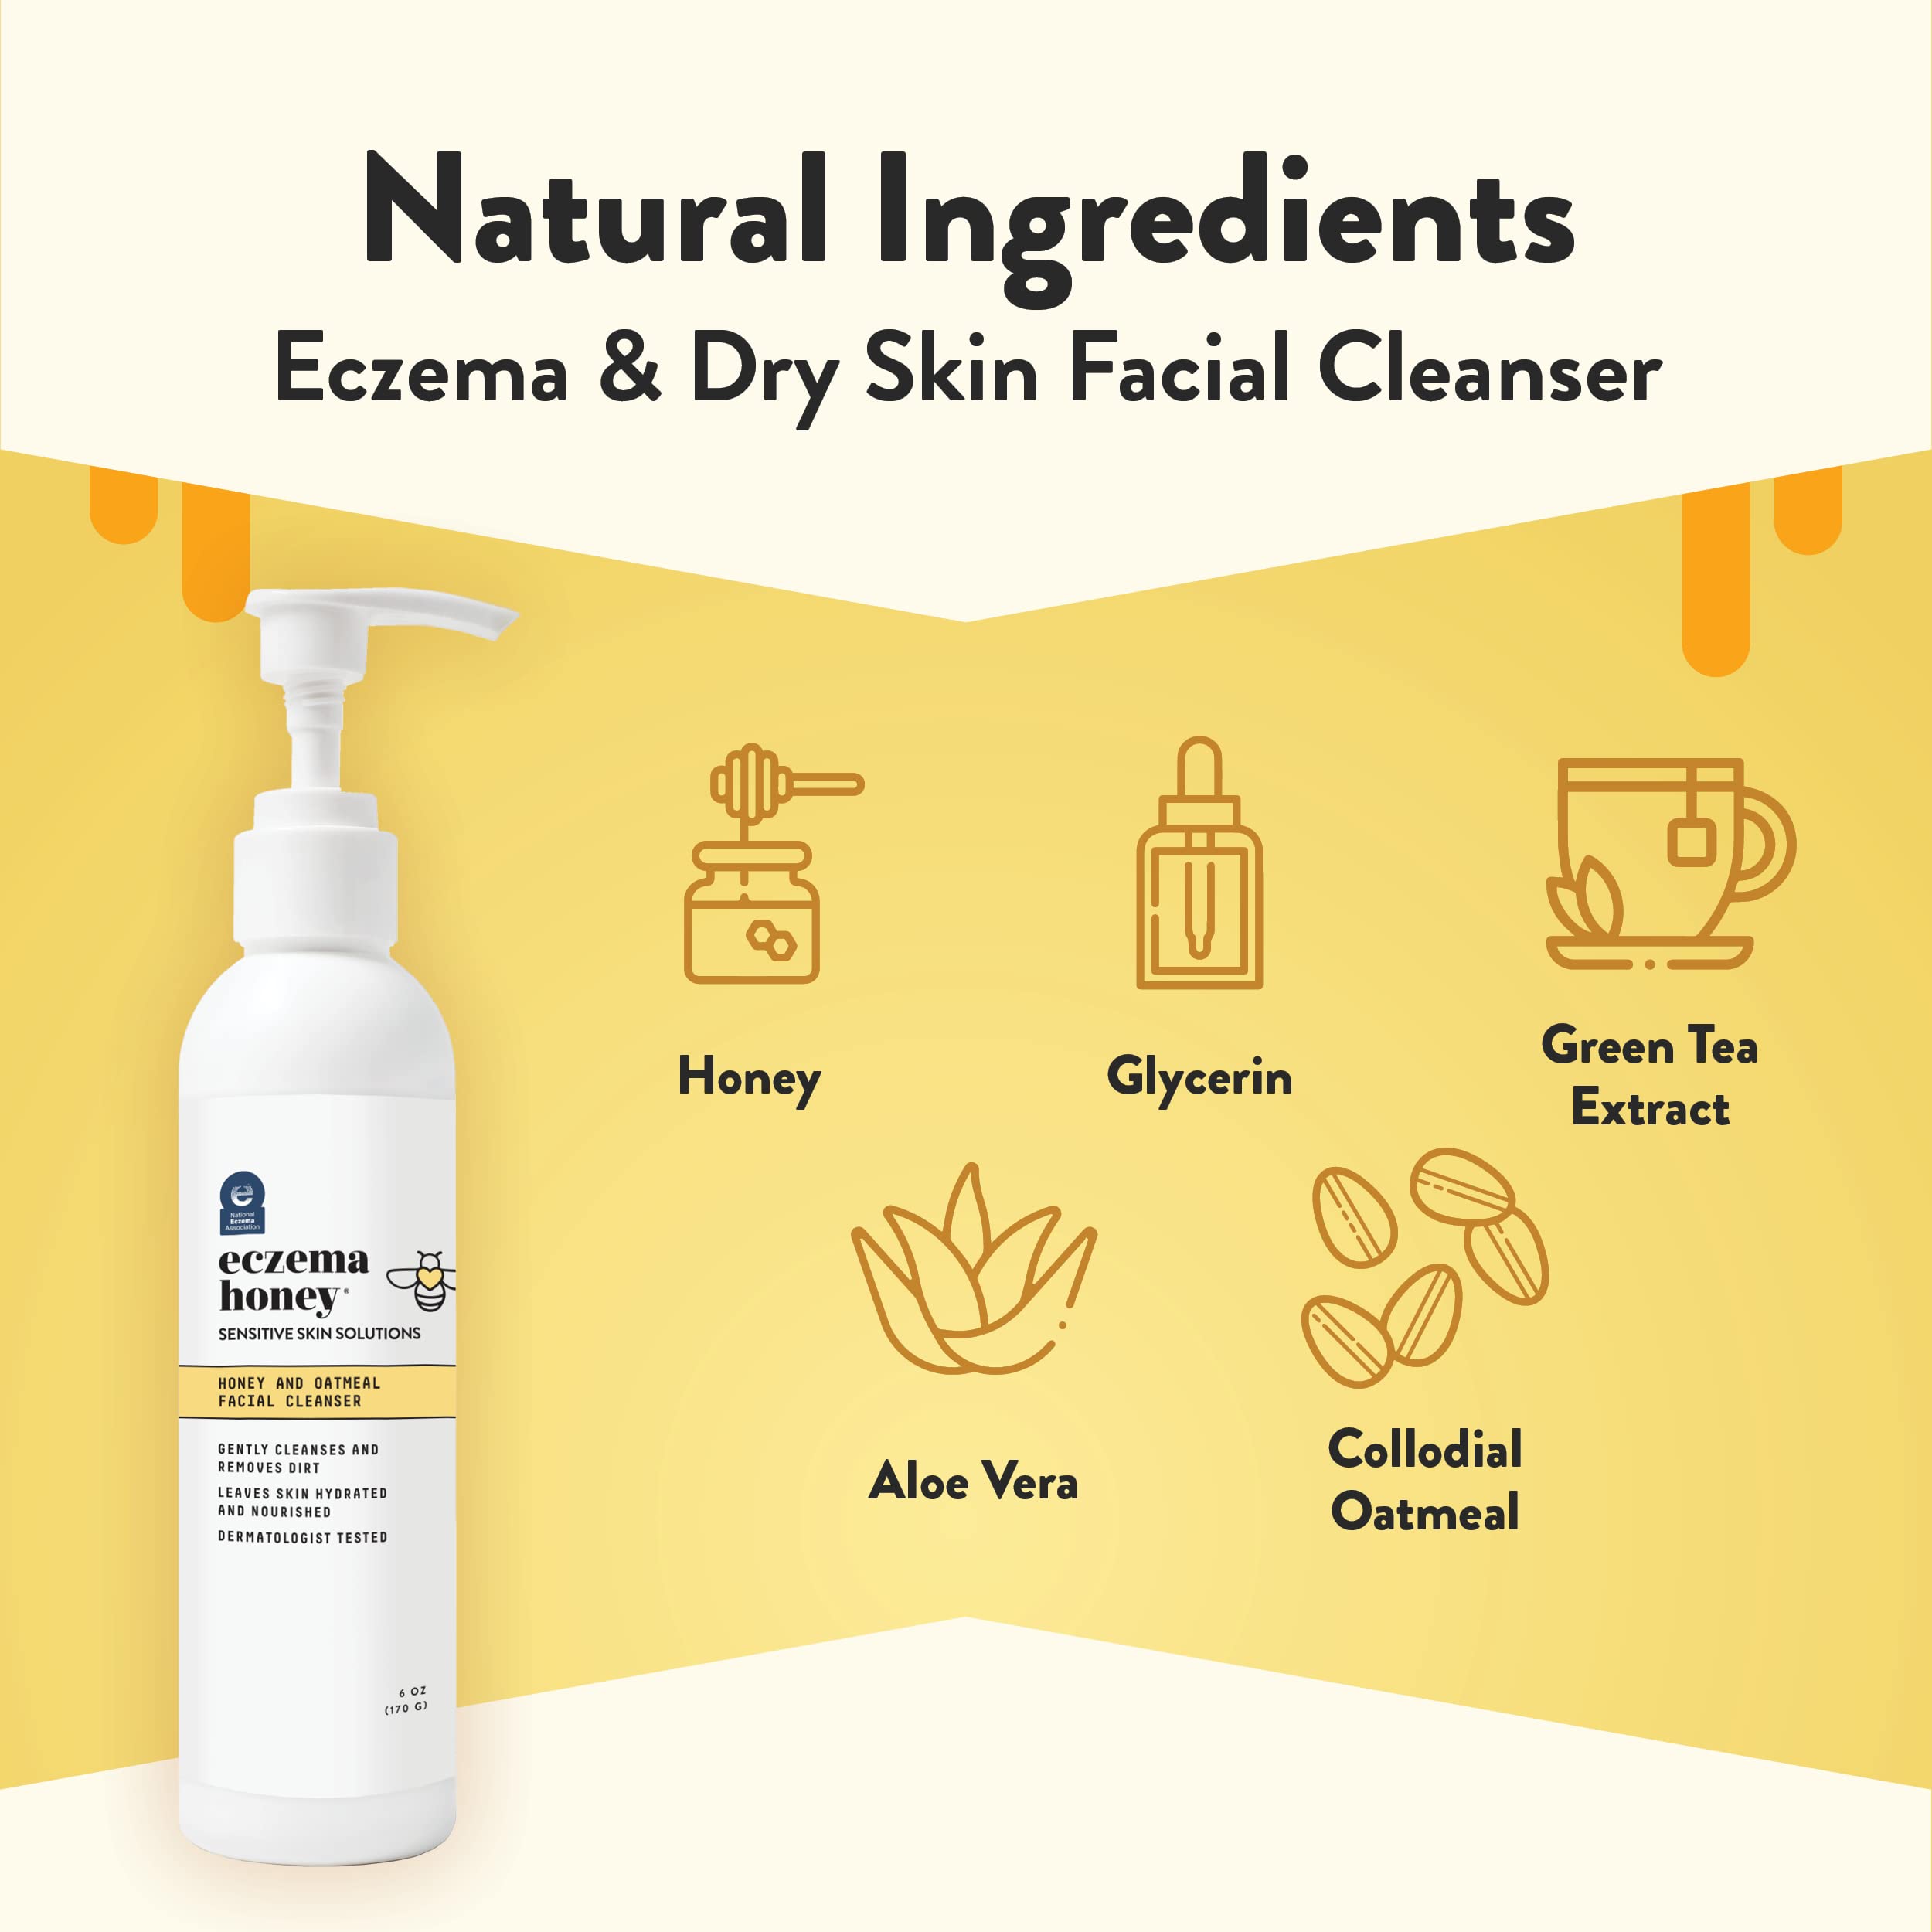 ECZEMA HONEY Oatmeal Facial Cleanser - Natural Eczema Face Wash Prevents Breakouts - Daily Gentle Face Cleanser for Dry, Itchy, Sensitive, & Irritable Skin (6 Oz)